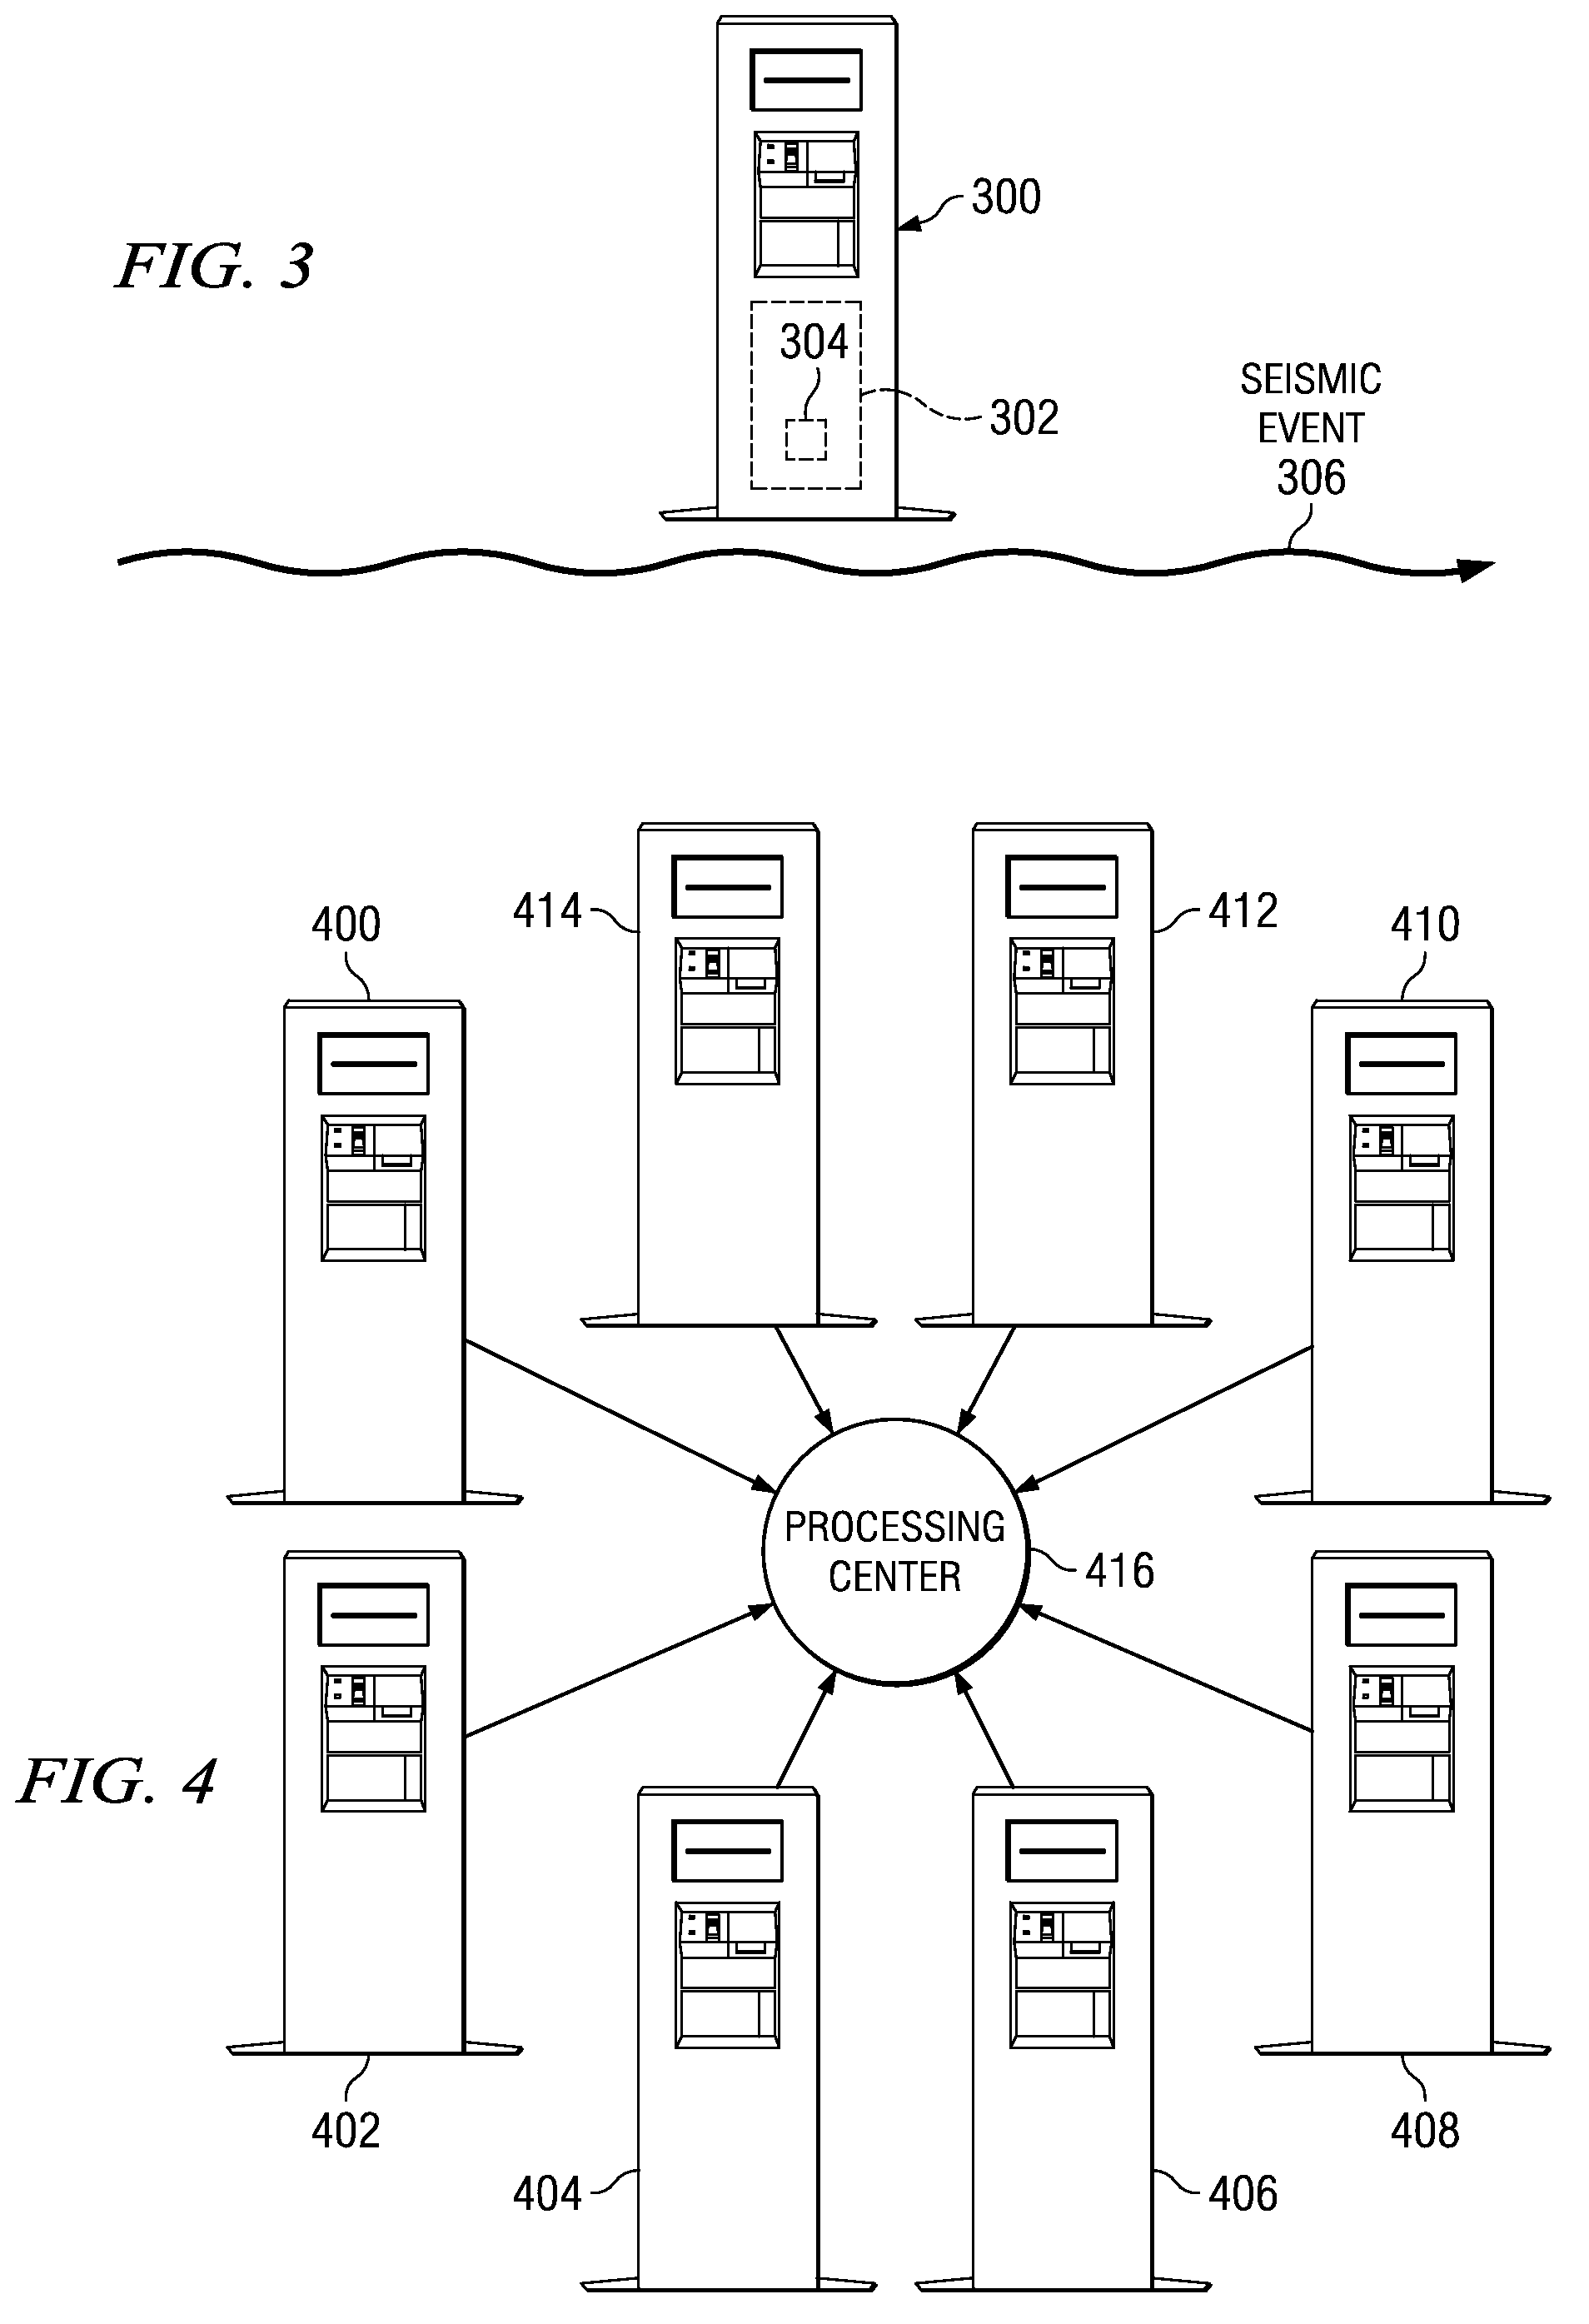 System and method for detection of earthquakes and tsunamis, and hierarchical analysis, threat classification, and interface to warning systems